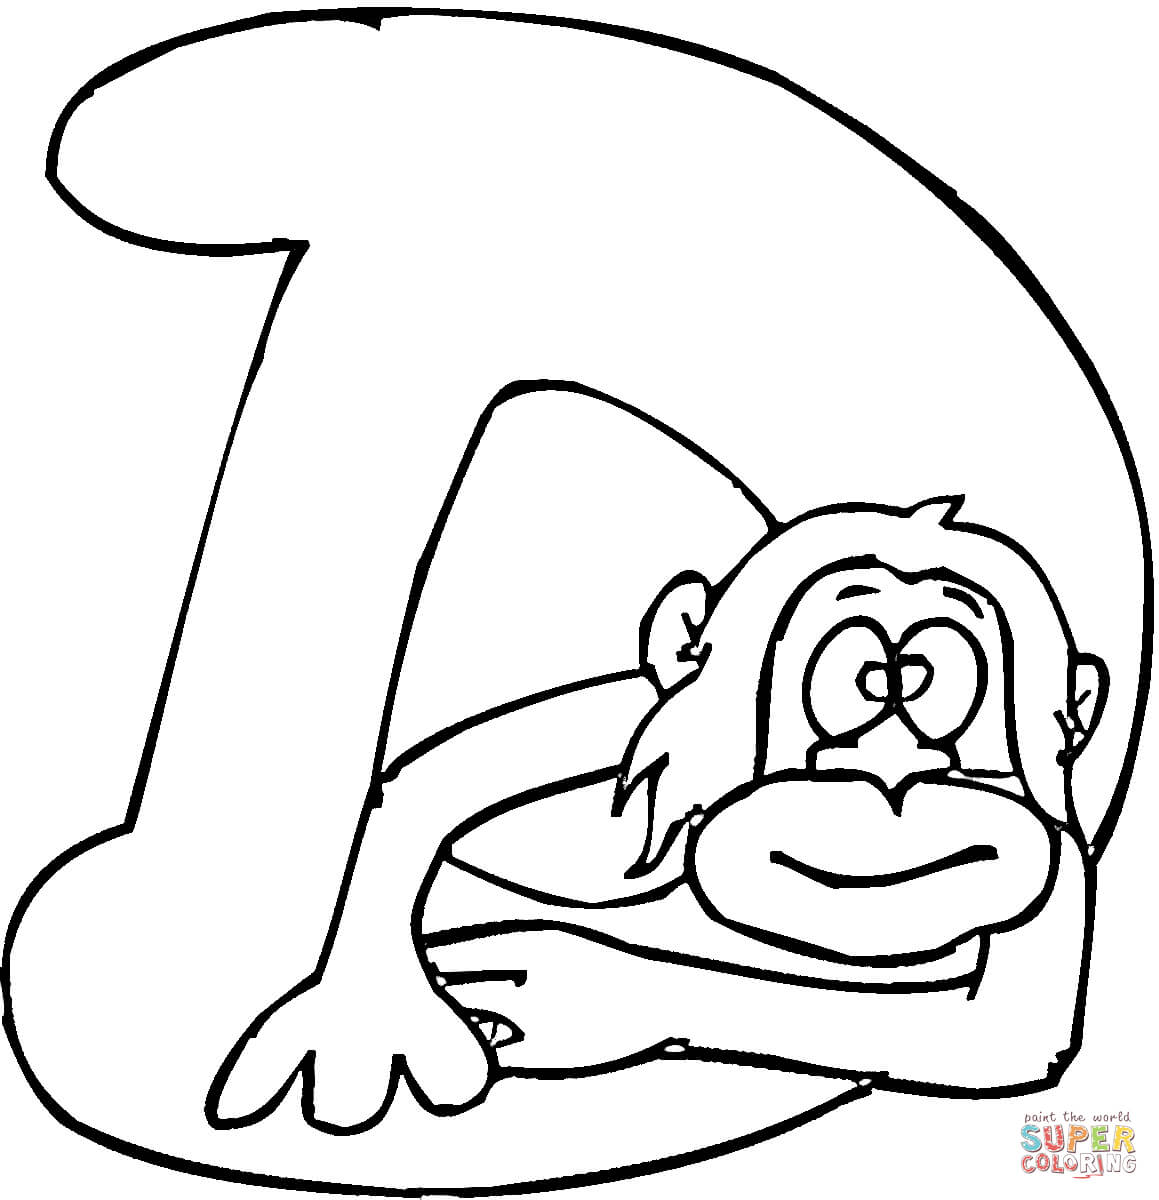 Letter D coloring pages | Free Coloring Pages